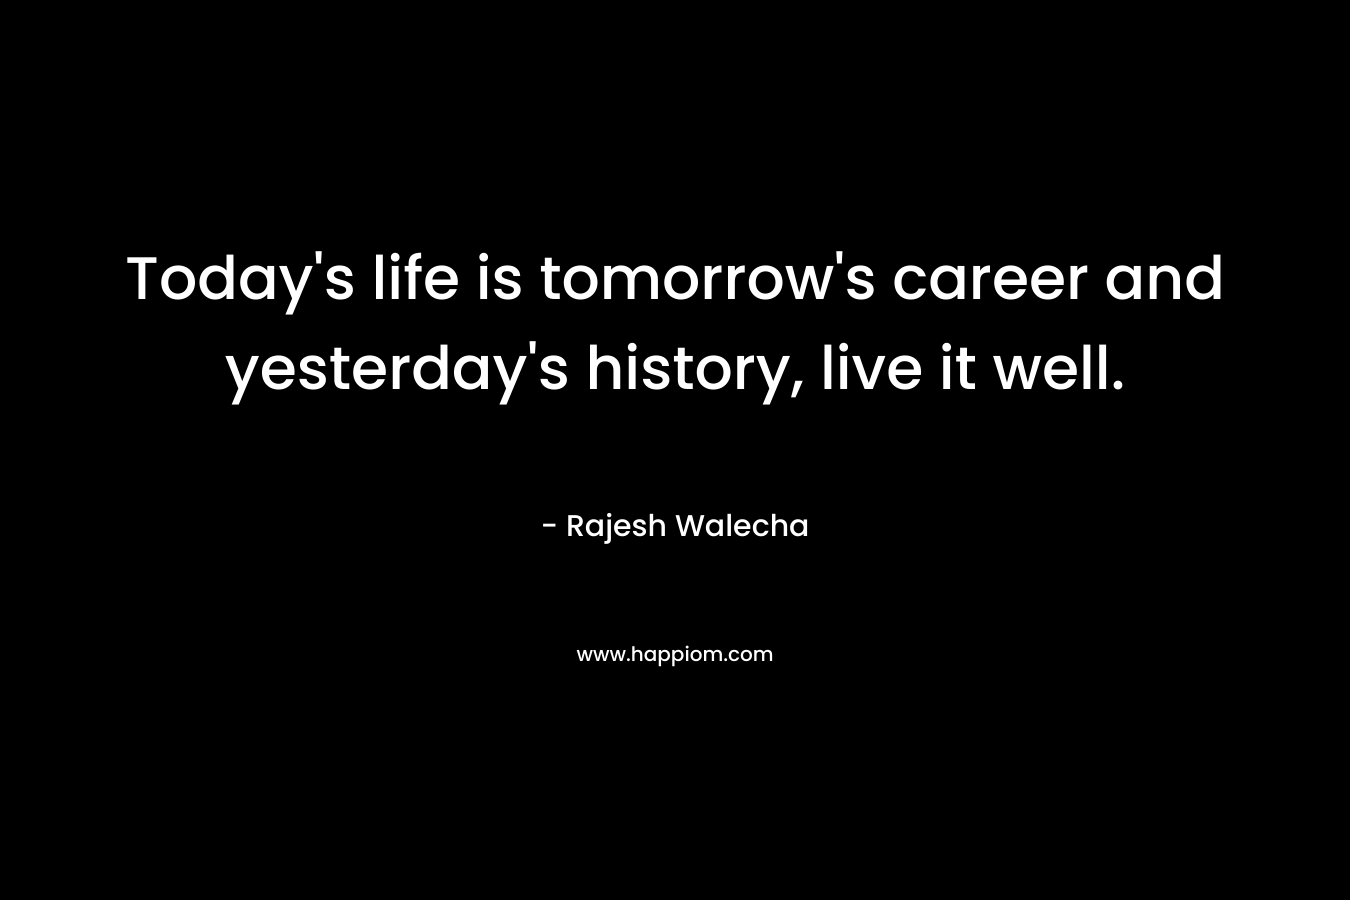 Today's life is tomorrow's career and yesterday's history, live it well.